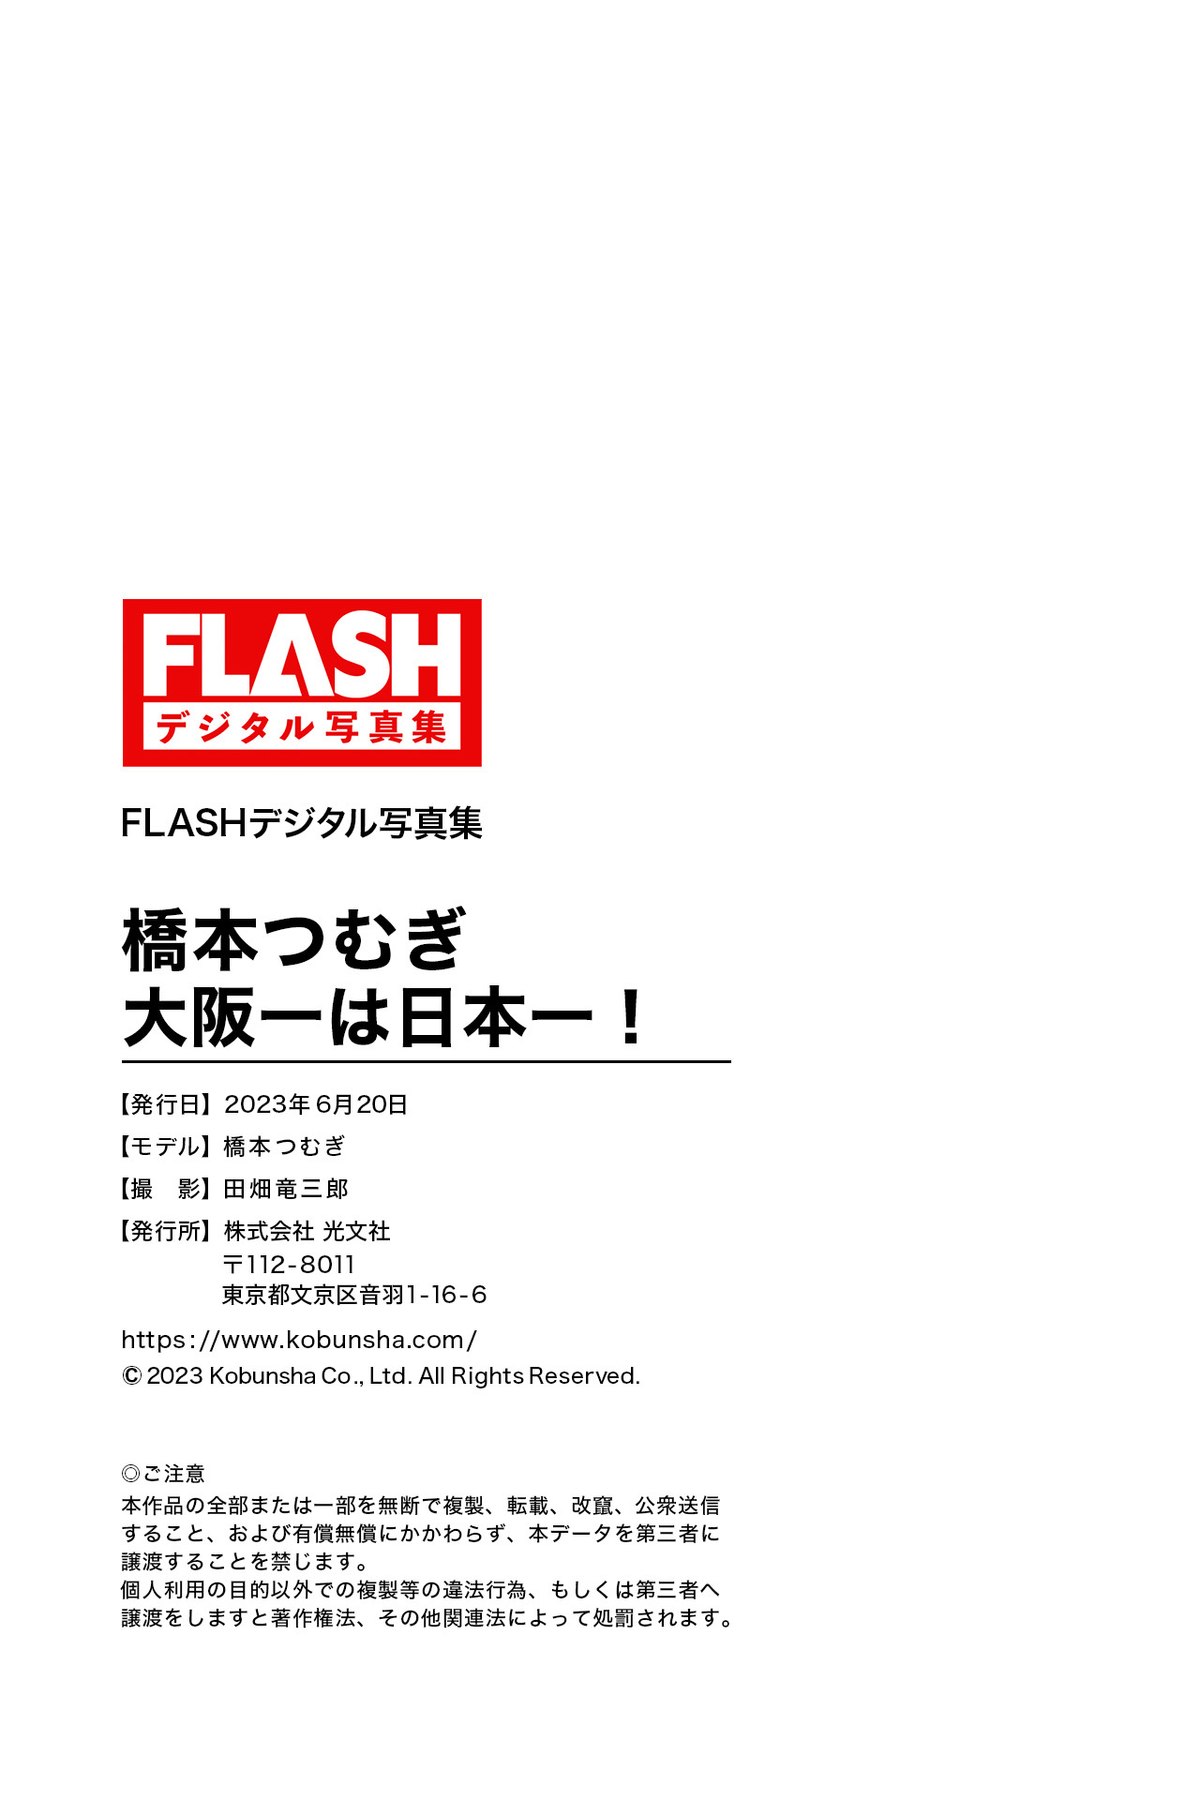 FLASH Photobook 2023 06 20 Tsumugi Hashimoto 橋本つむぎ The Best In Osaka Is The Best In Japan 0090 4914722722.jpg